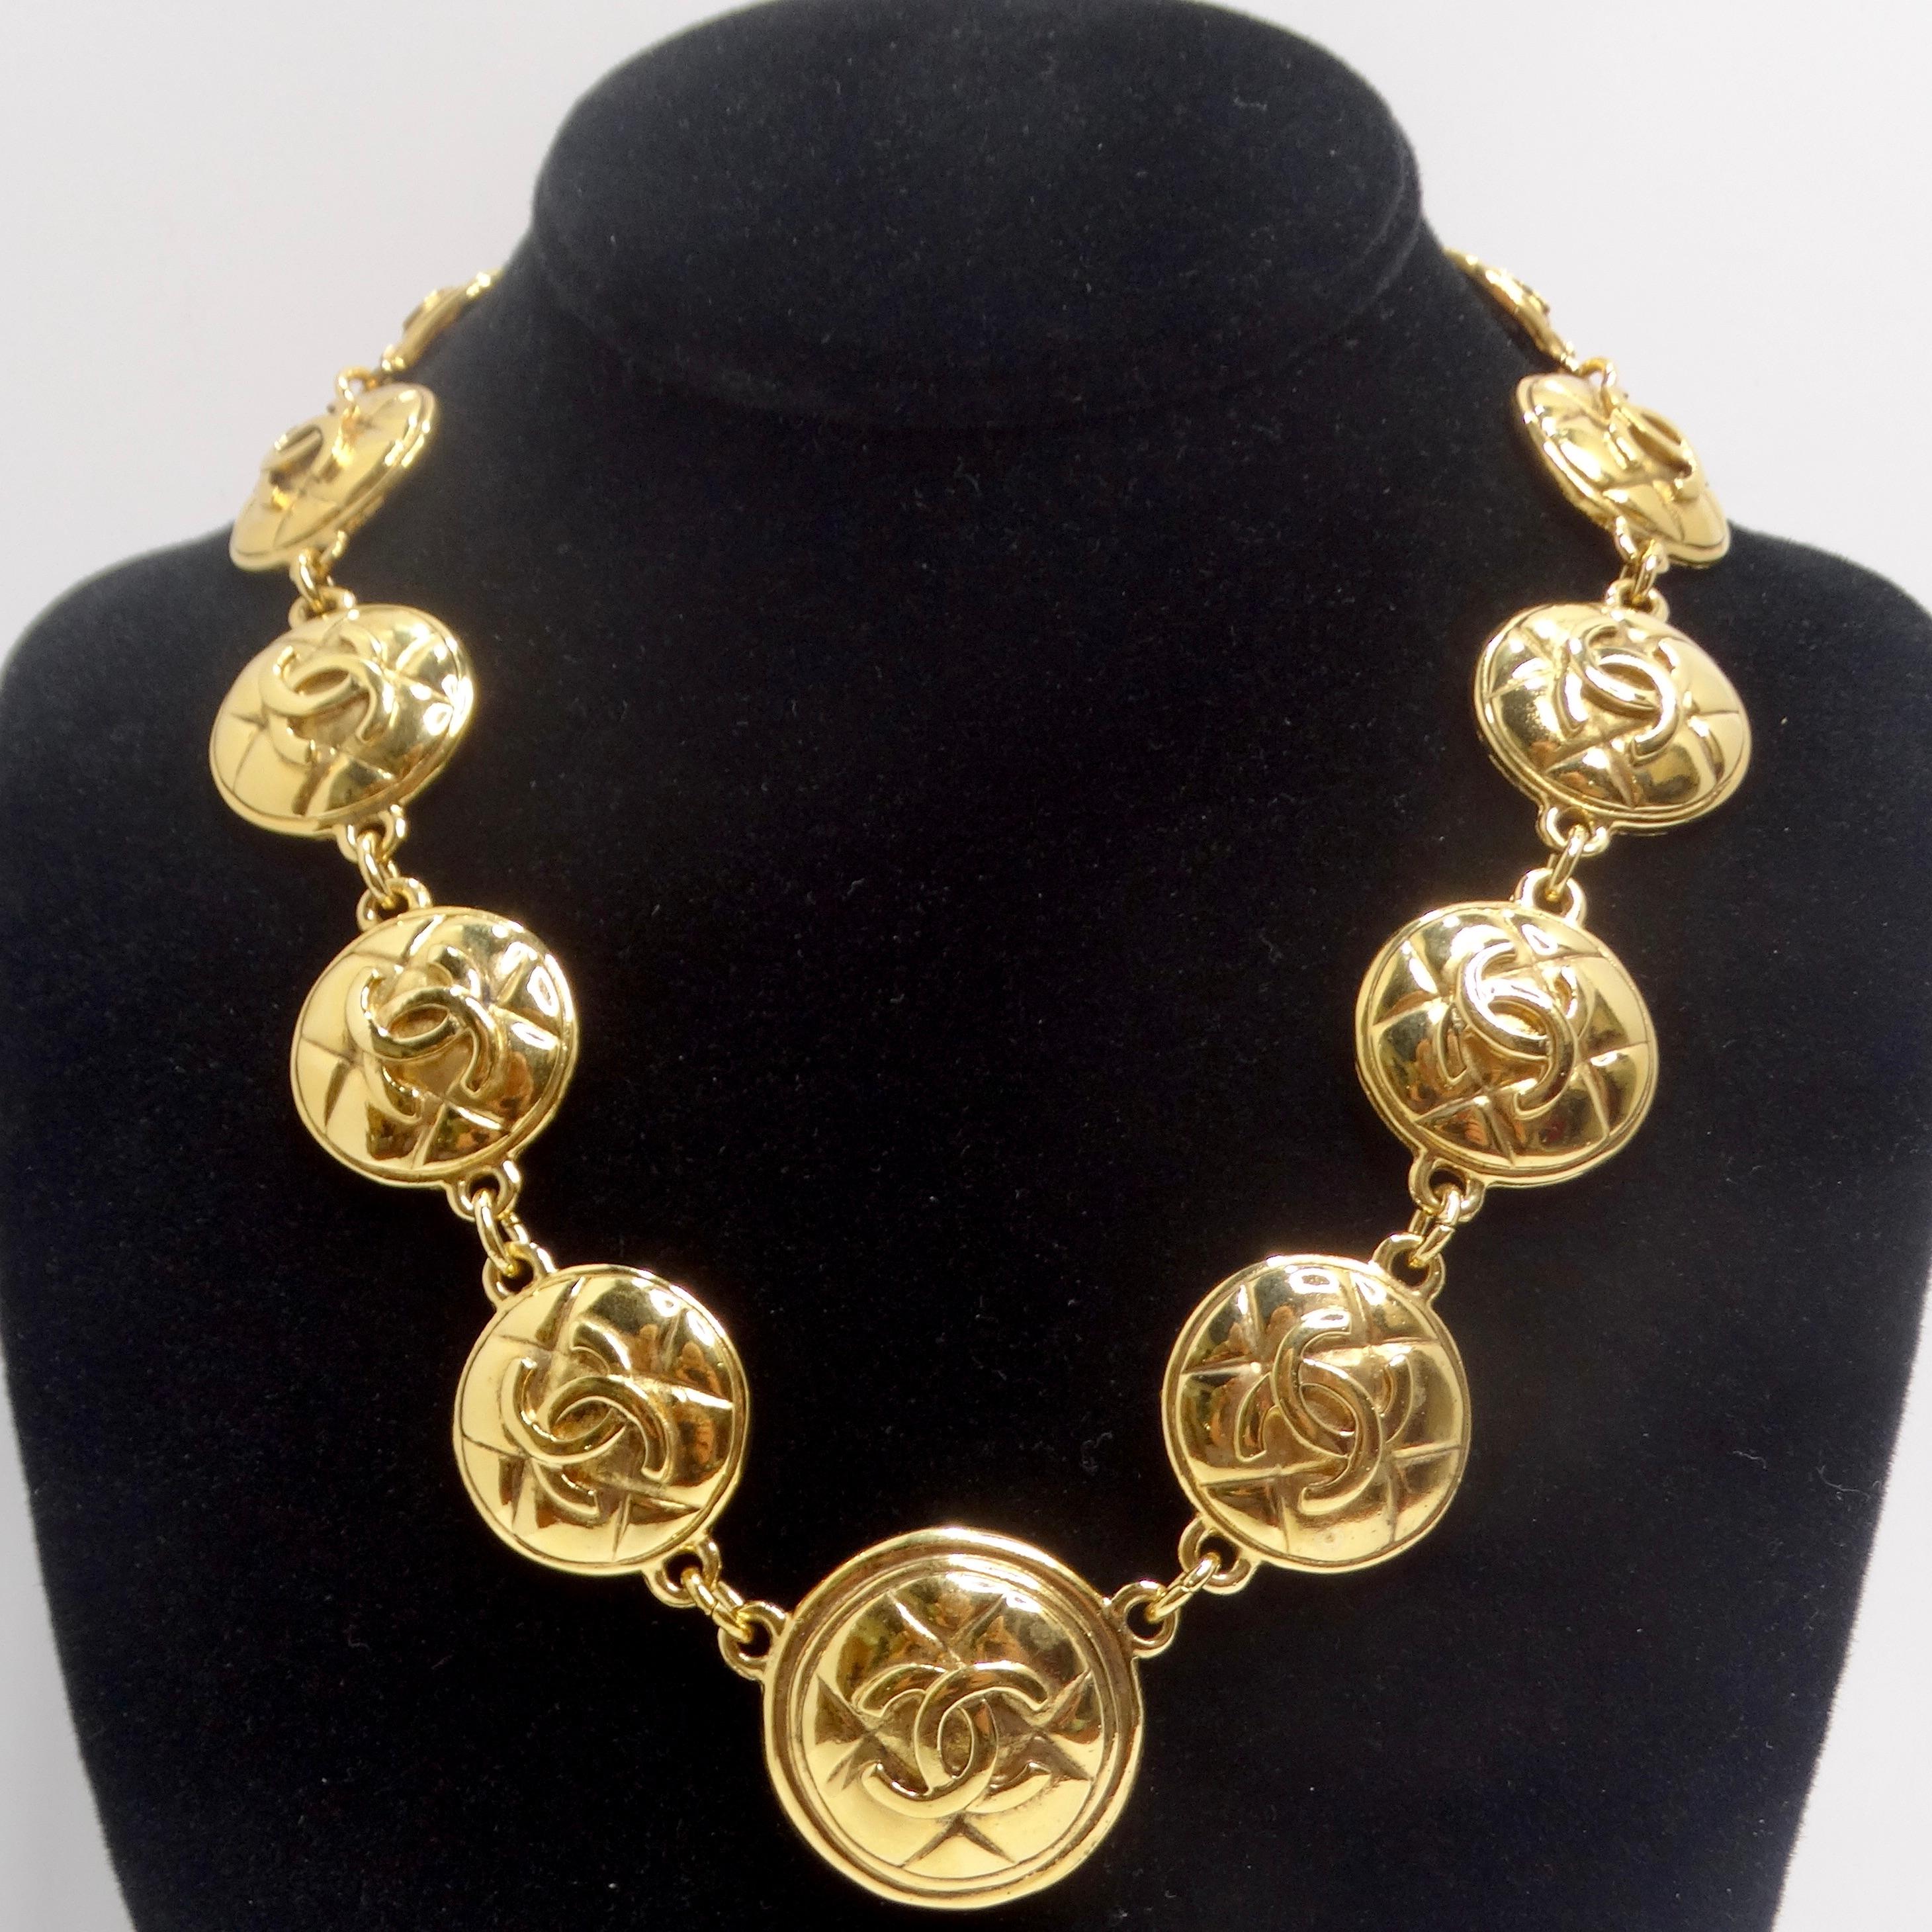 Introducing the Chanel 1980s Gold Tone Logo Quilted Medallion Necklace – a classic yellow gold plated link necklace that embodies vintage glamour. This timeless yet glamorous necklace features an arrangement of gold plated round charms, each